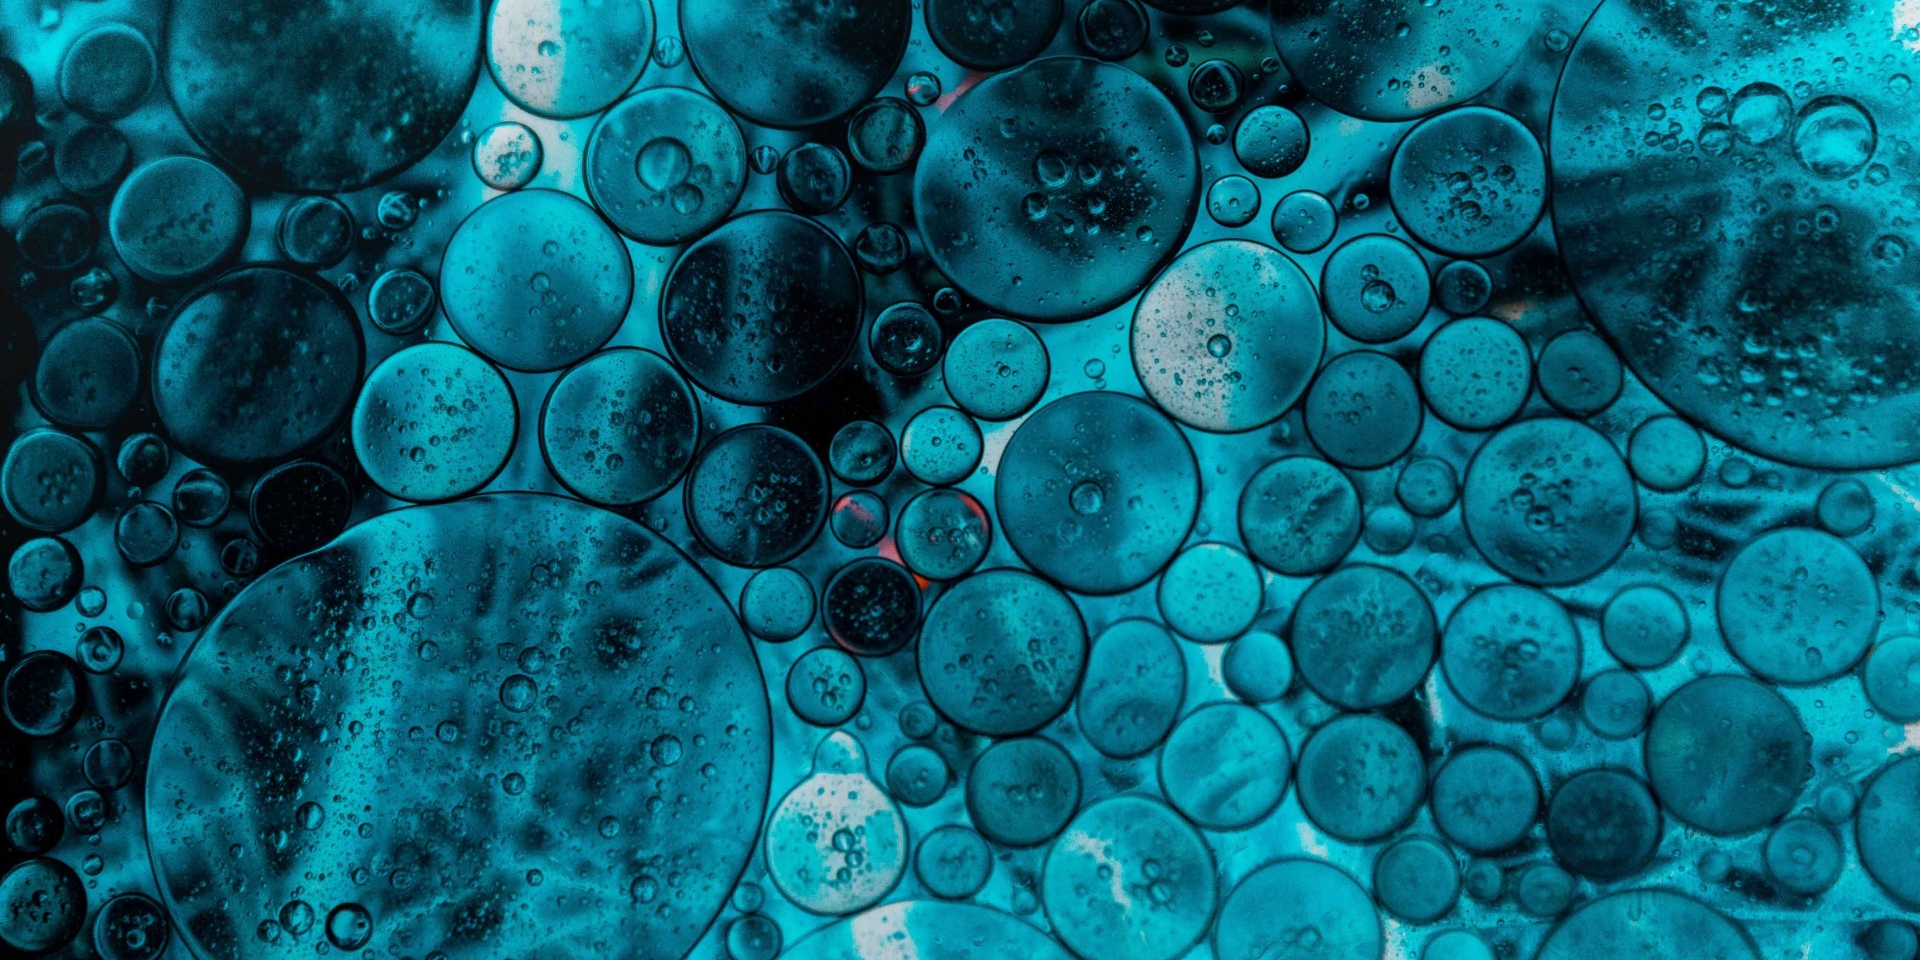 Abstract image of blue bubbles